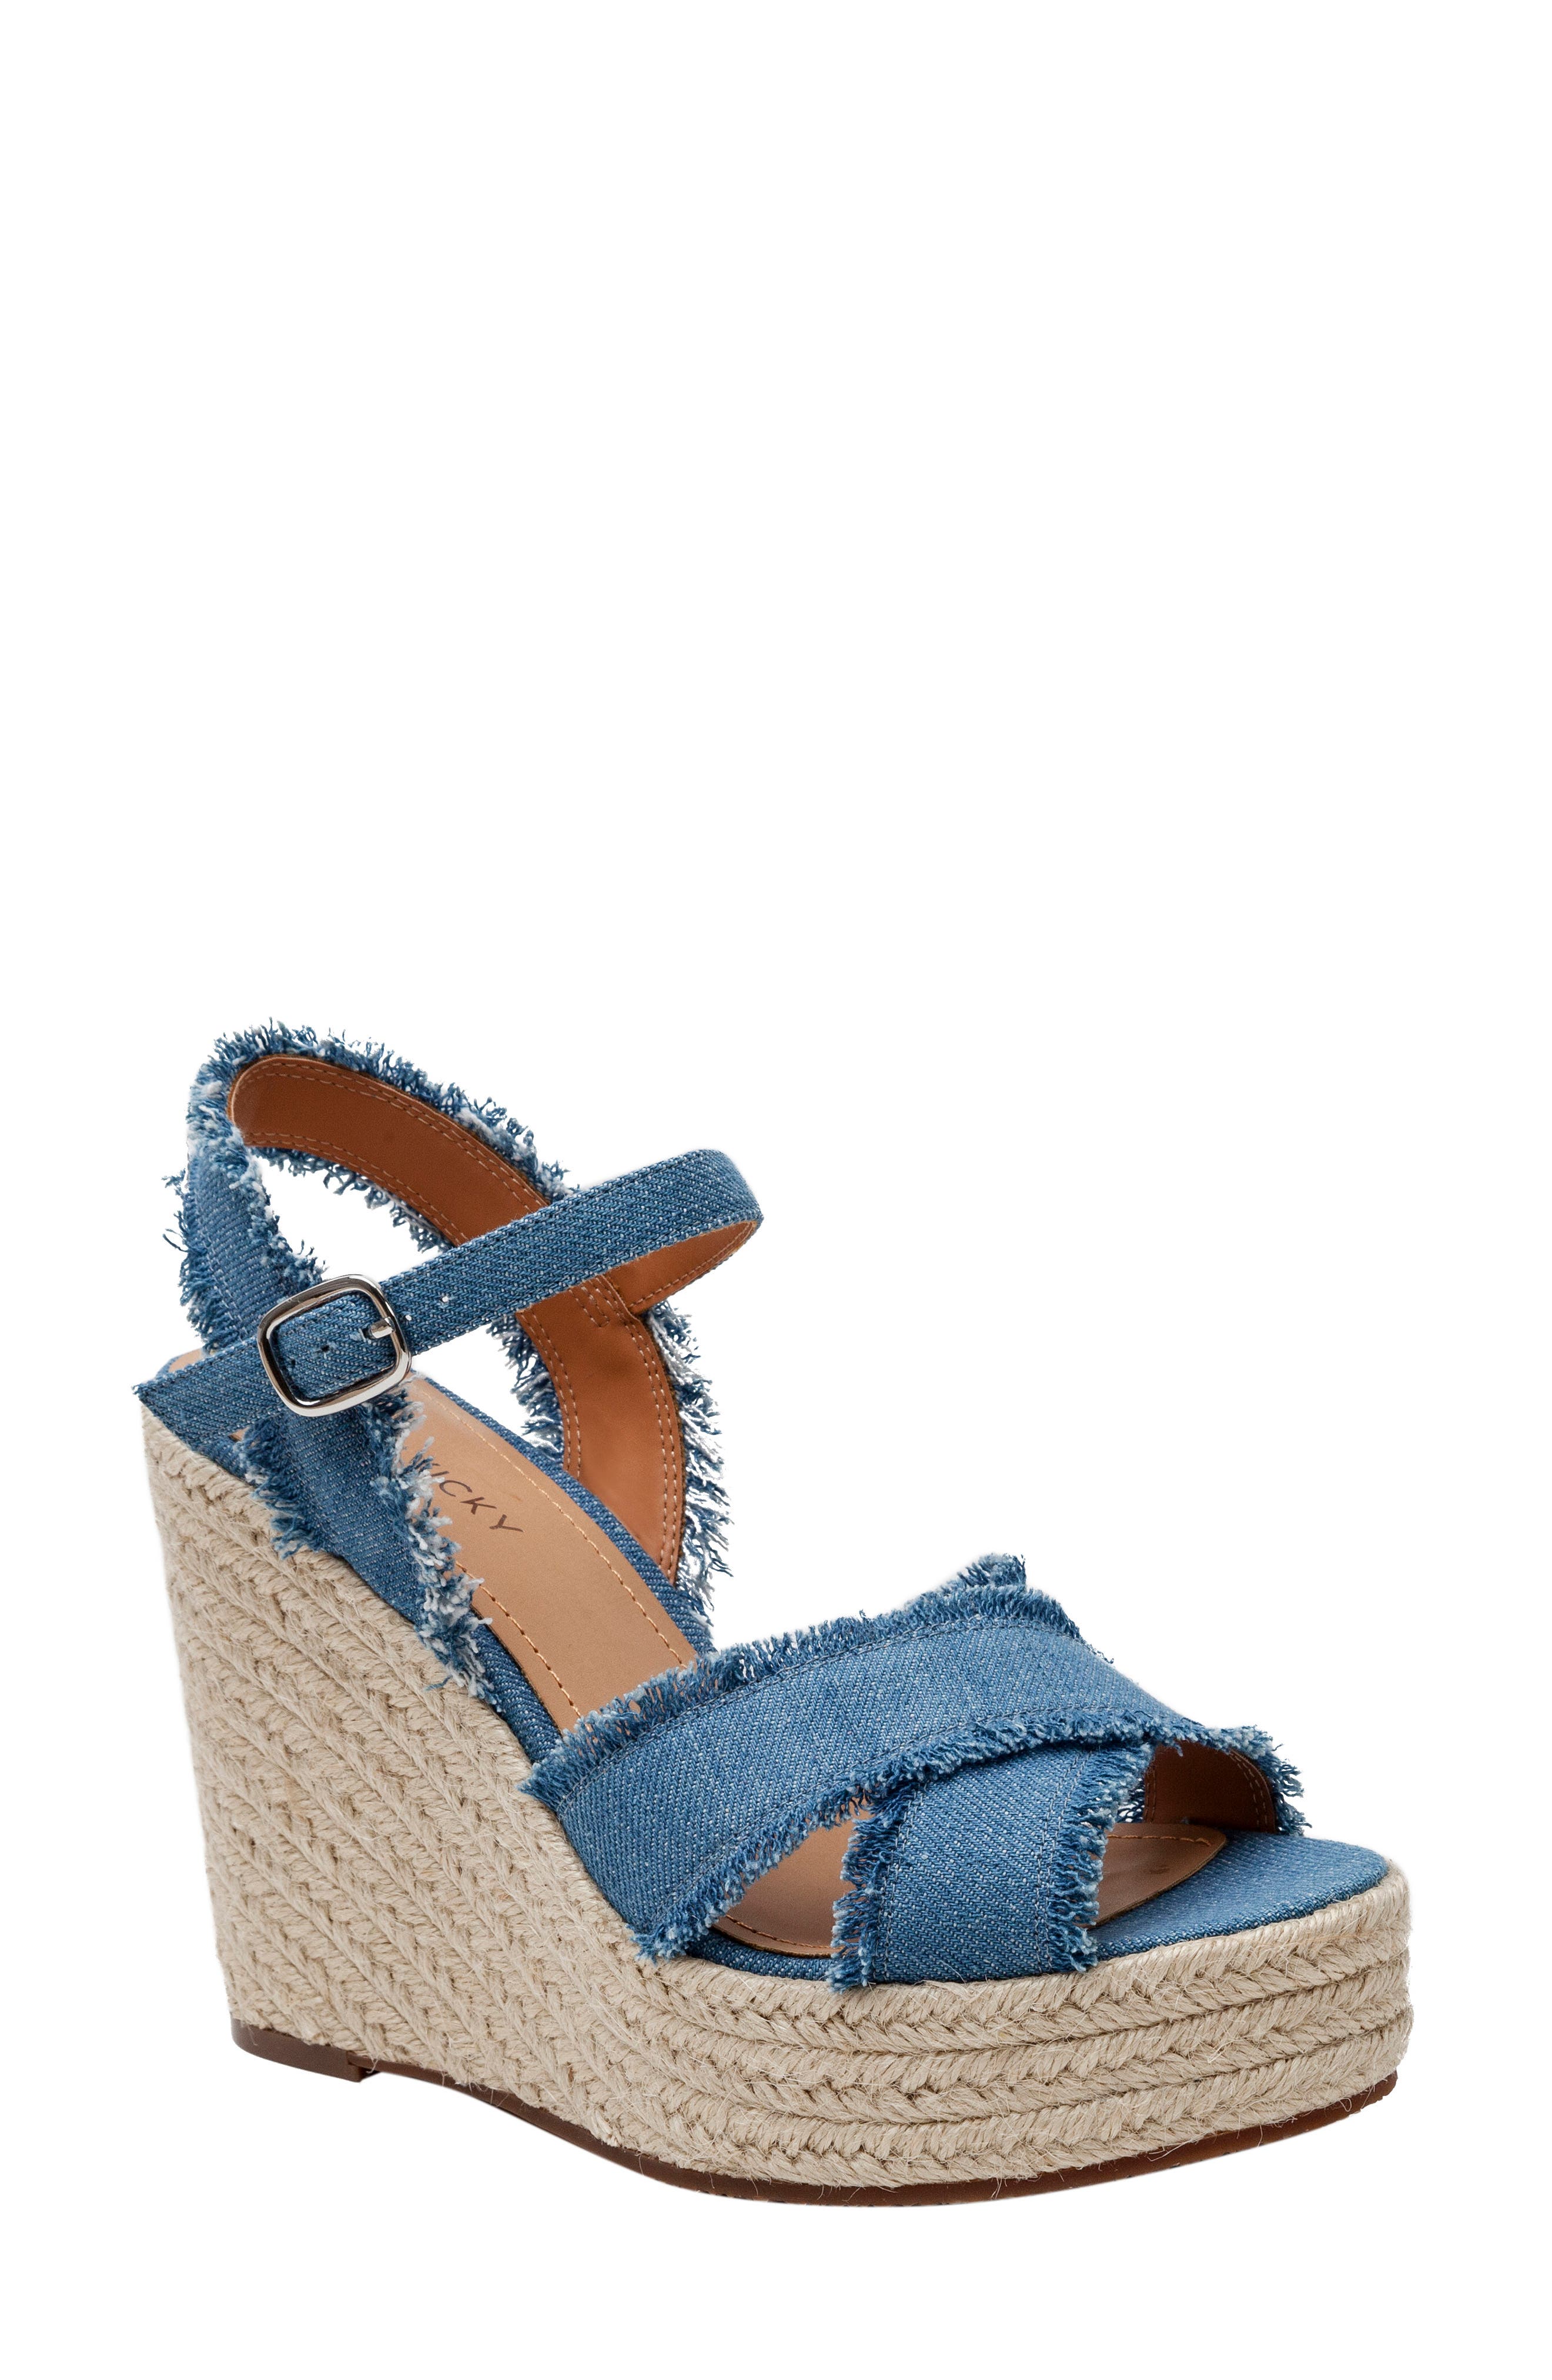 Soludos Womens Wedge Sandal Denim Chambray Blue Ankle Strap Buckle Size 6